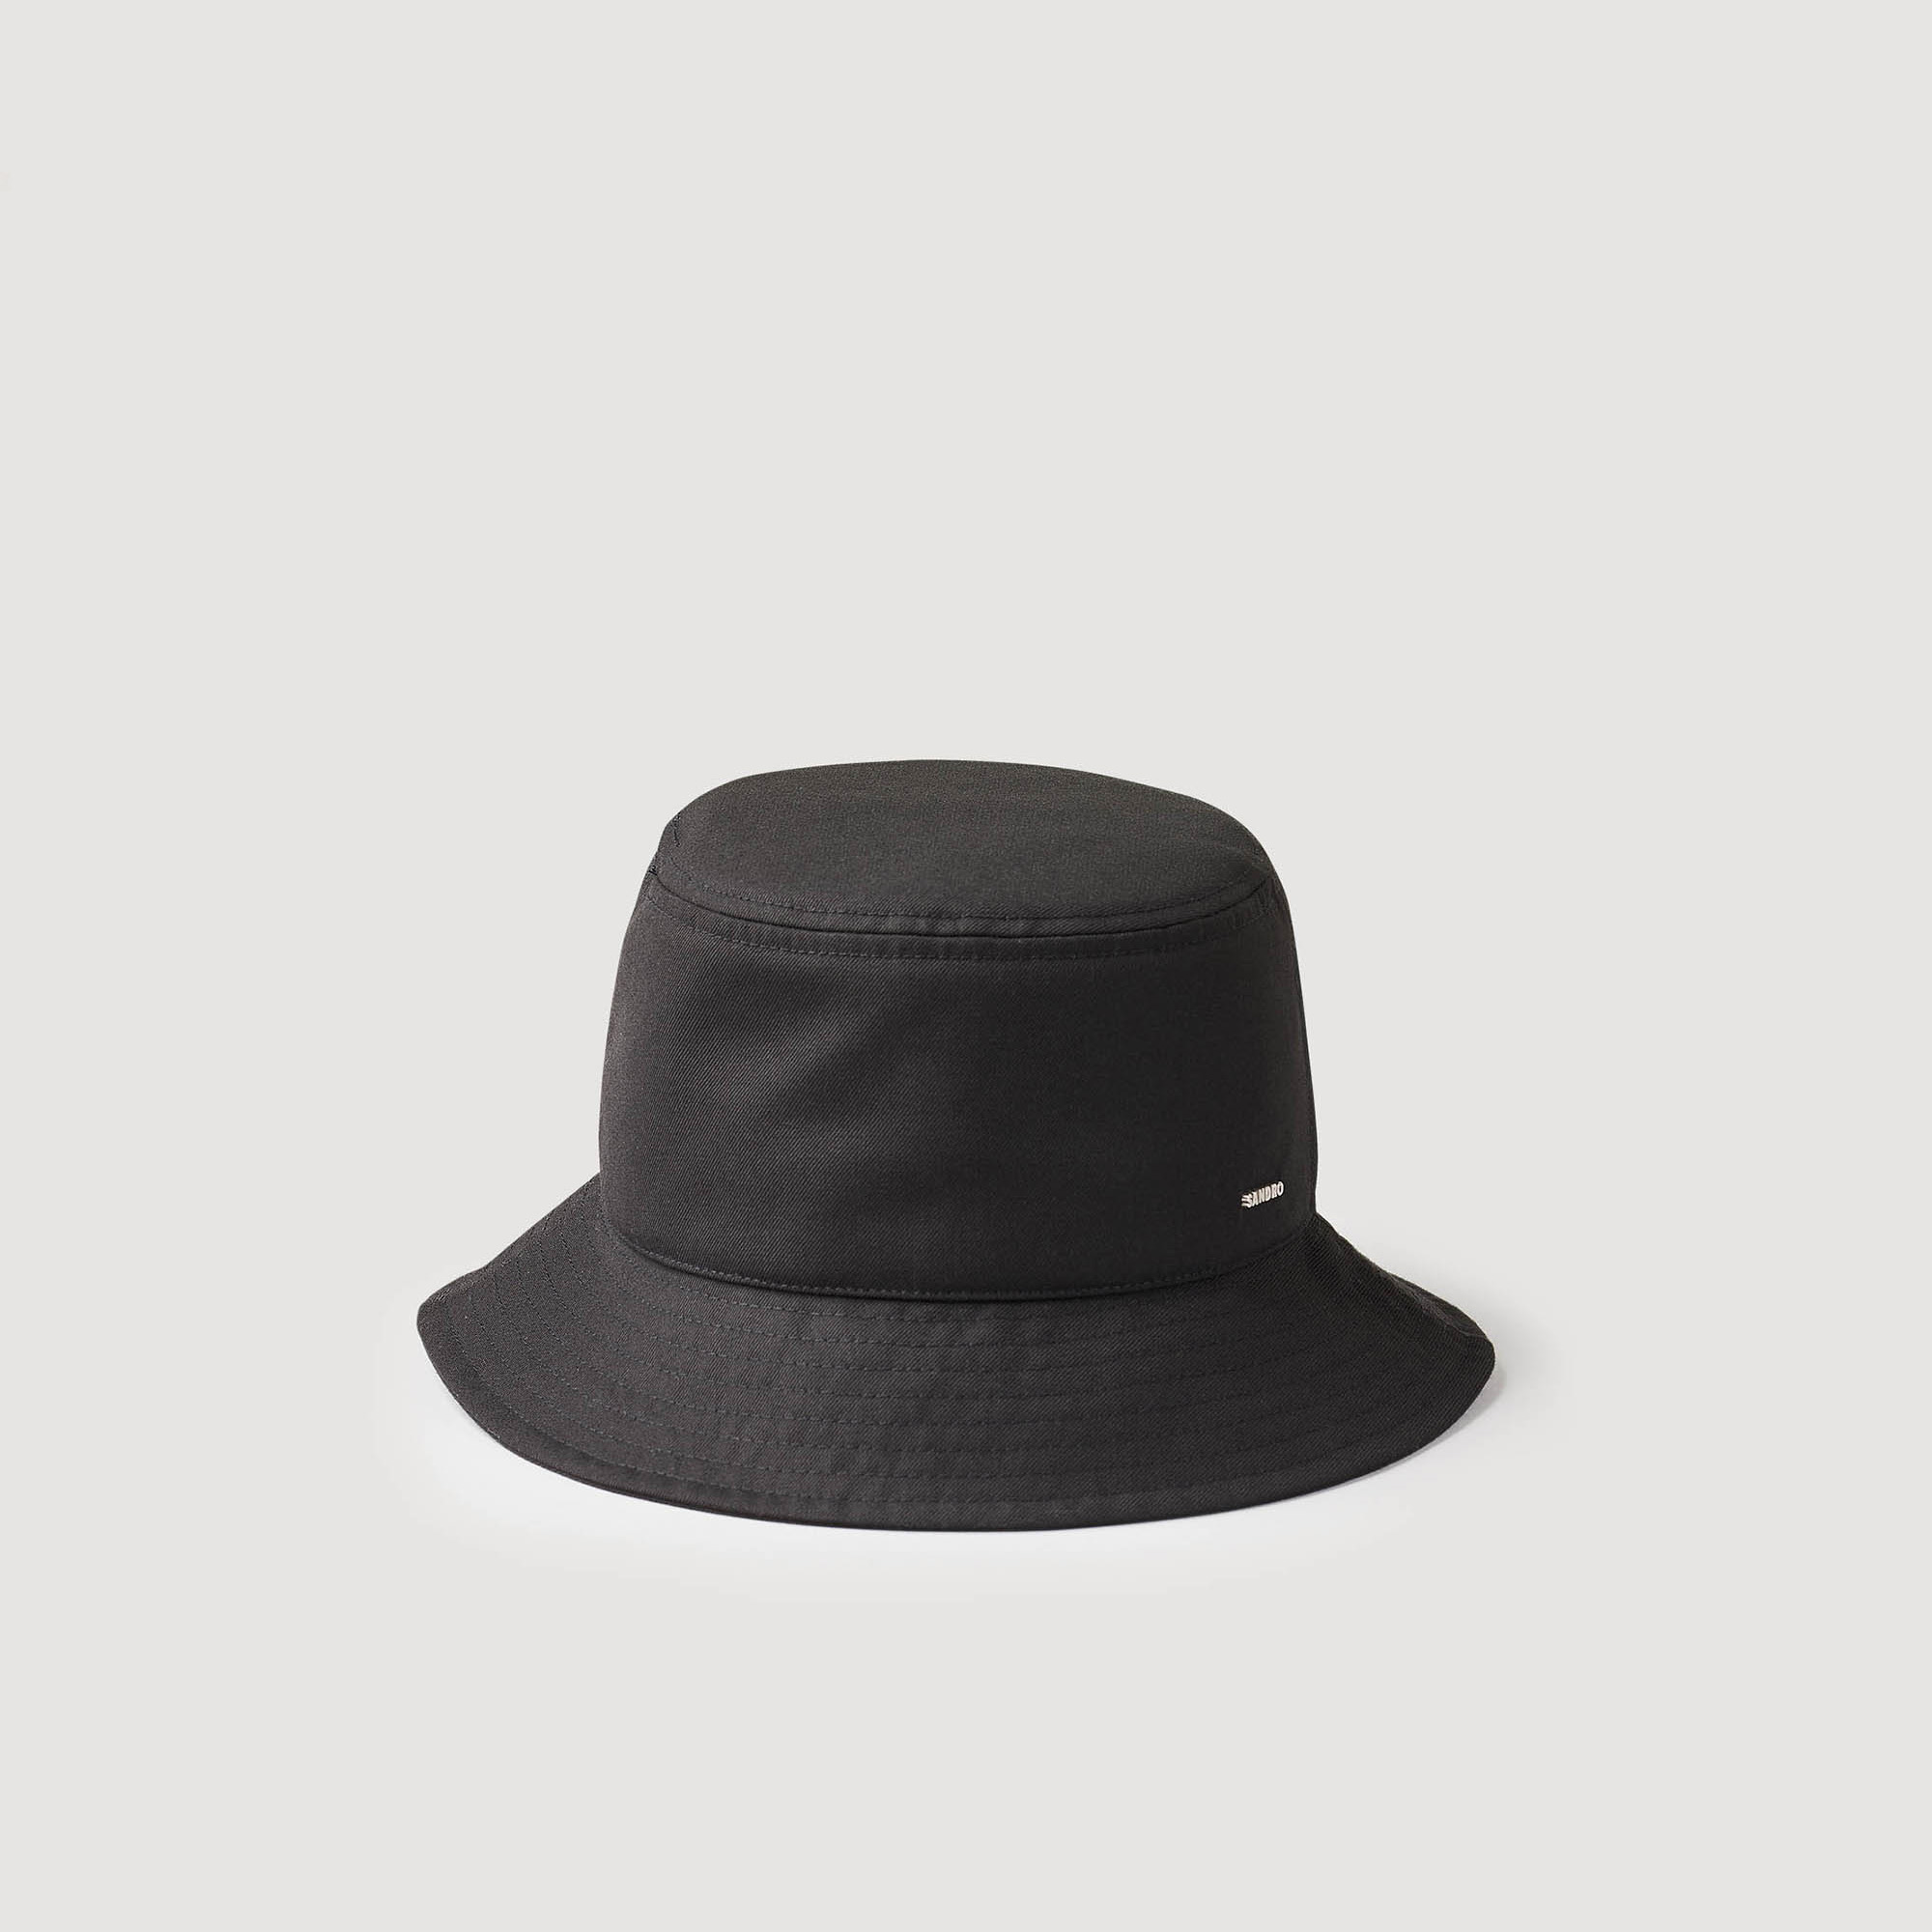 Sandro polyester Water-repellent technical fabric bucket hat embellished with a Sandro metal rivet on the side